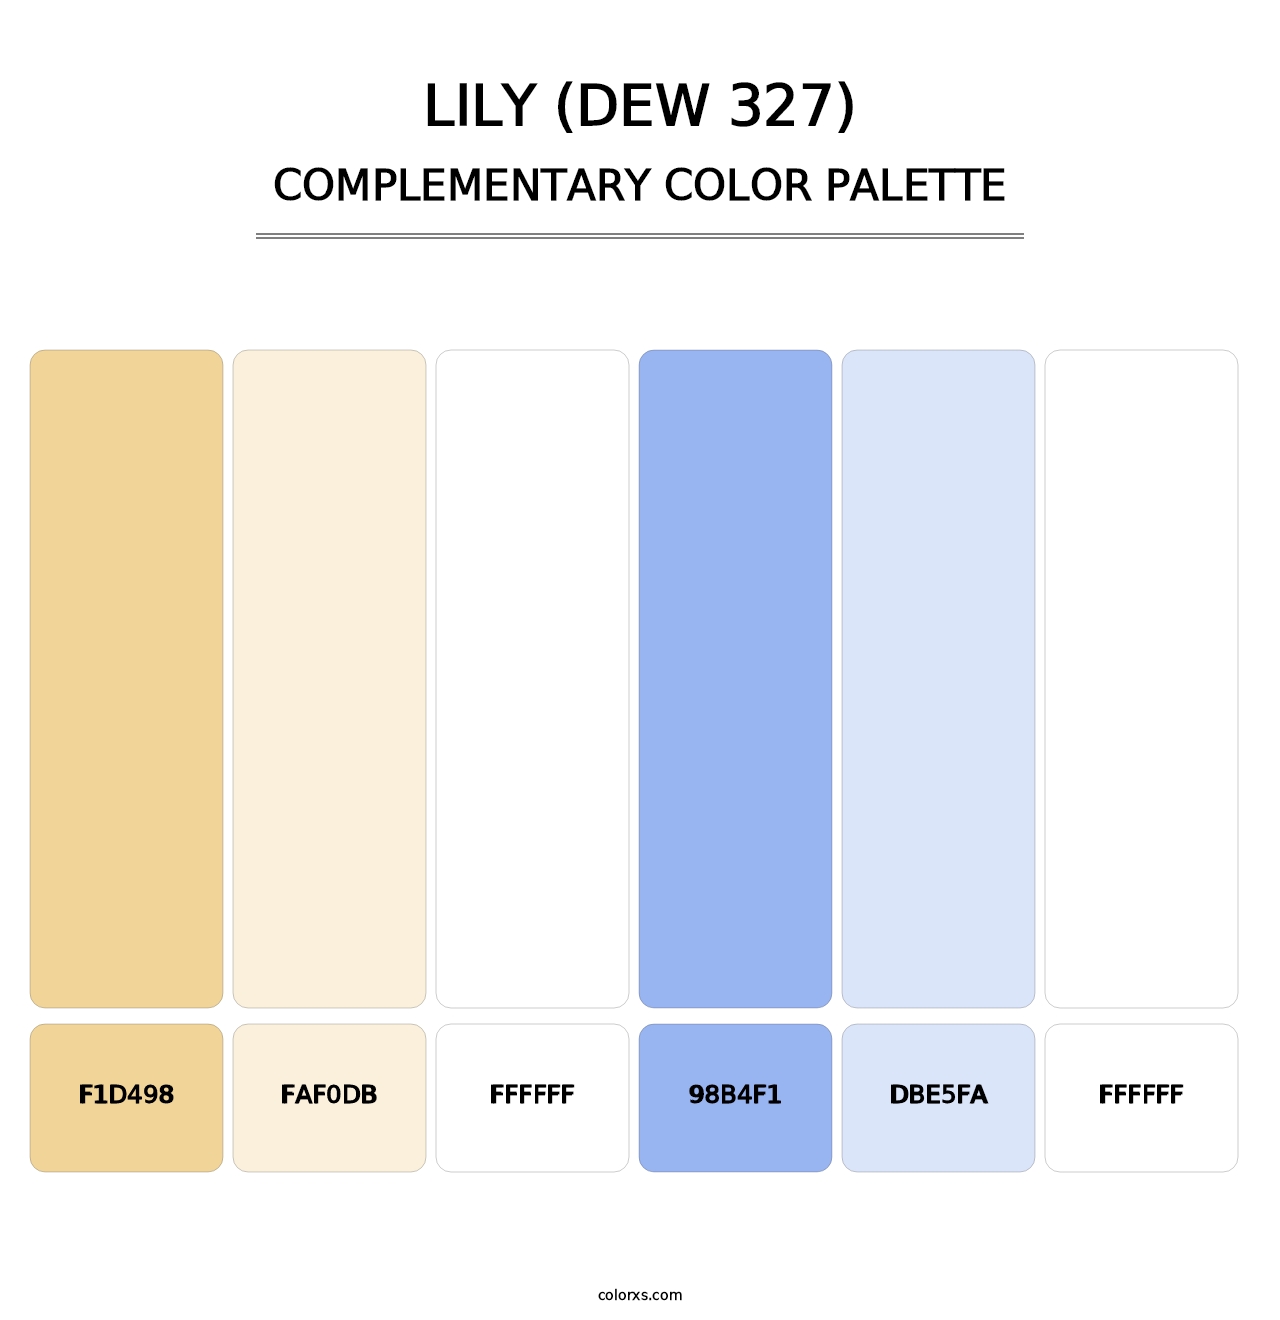 Lily (DEW 327) - Complementary Color Palette